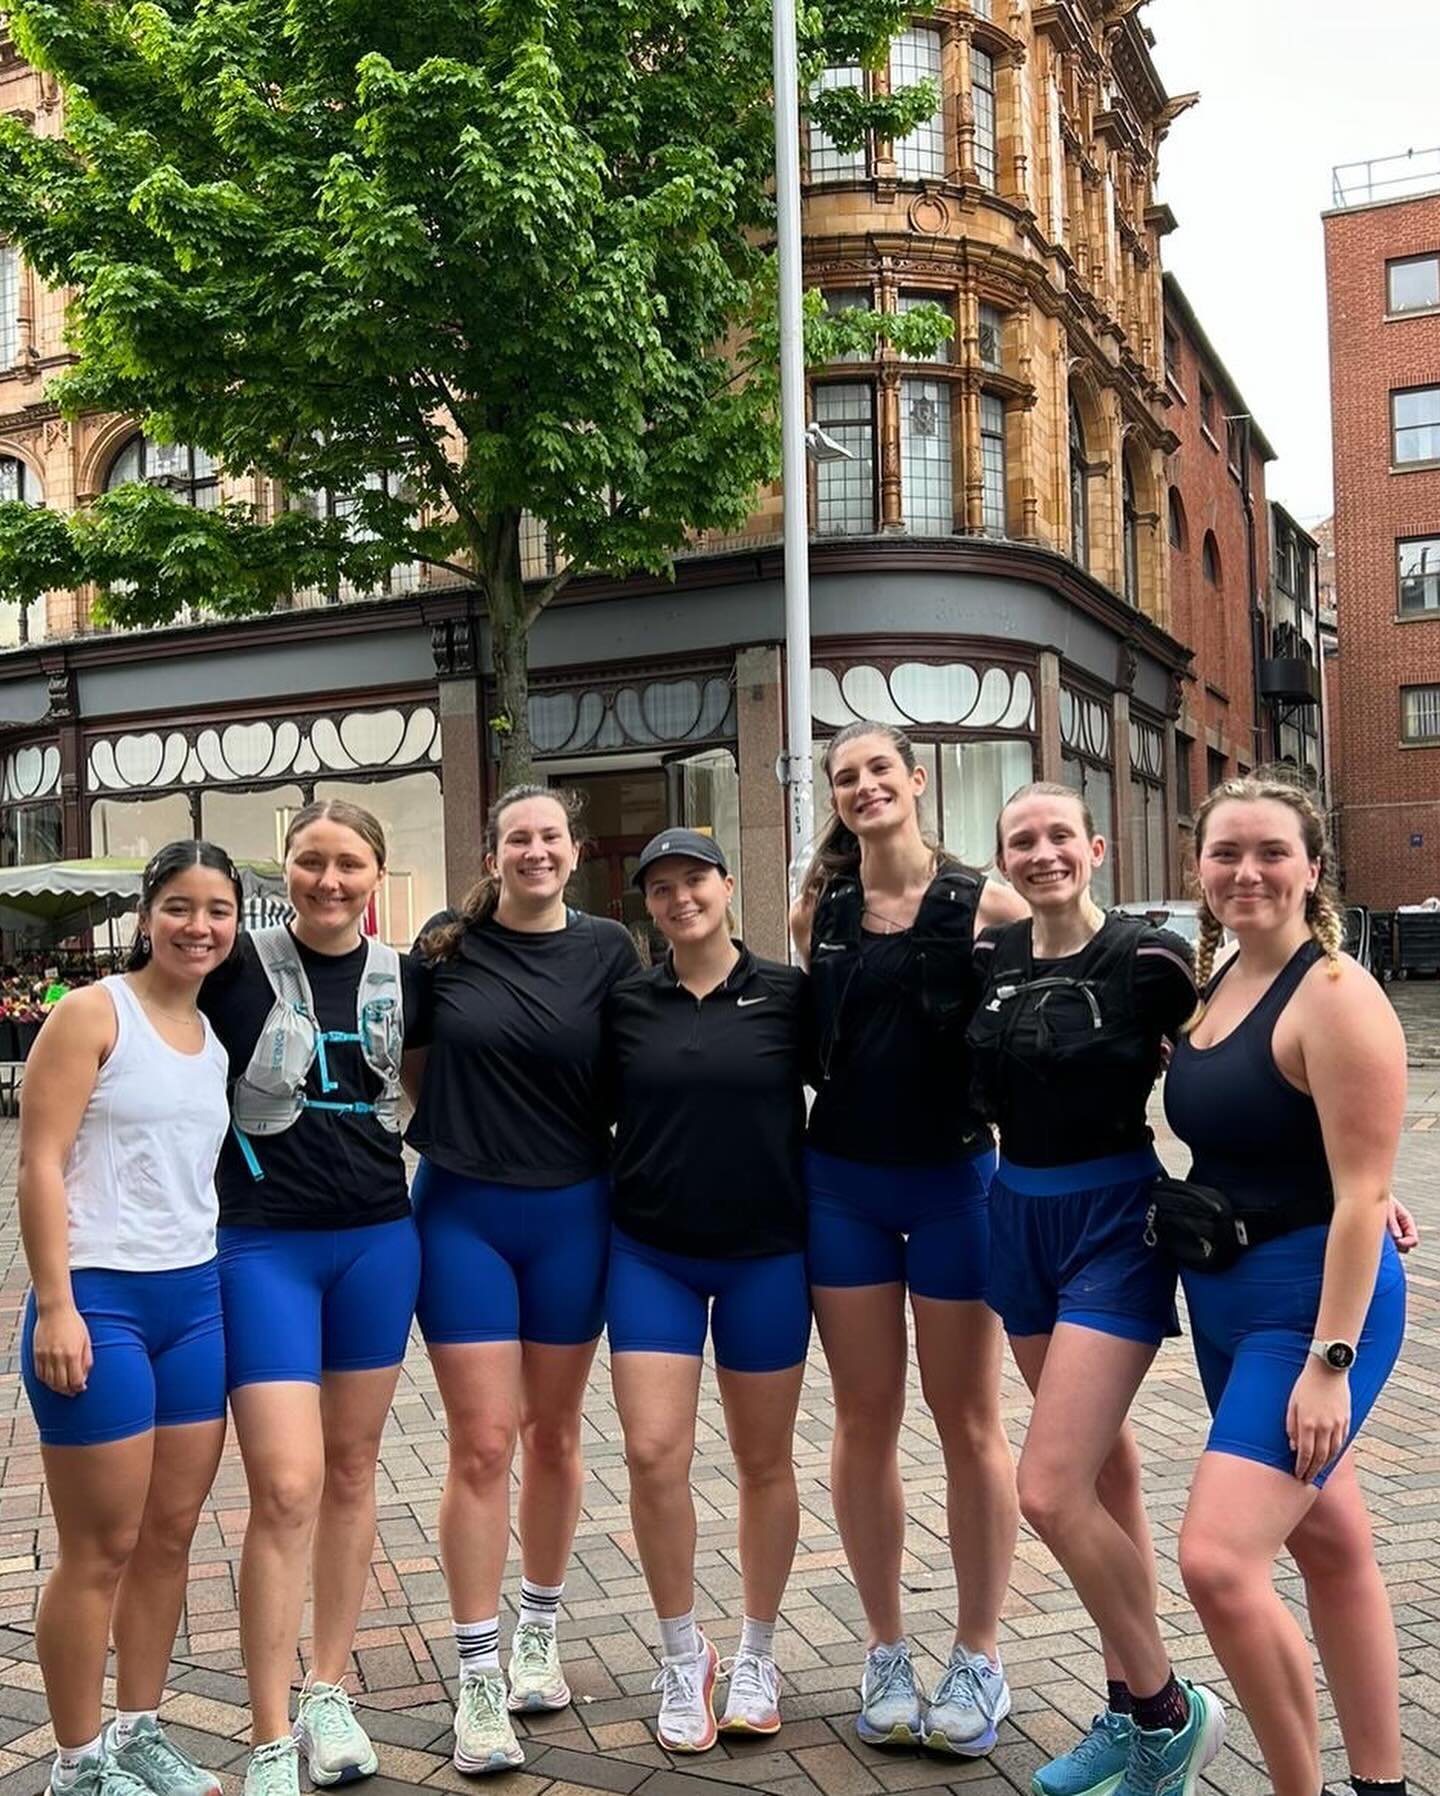 WEAR THE DAMN SHORTS GIRLS 🧡🩷

OBSESSED with our Notts Ambassadors turning up in matching blue @sweatybetty last Saturday 🥹🥹 and all of you that joined us across the UK to free your legs!!! 

So much love to all of you that empowered yourselves a